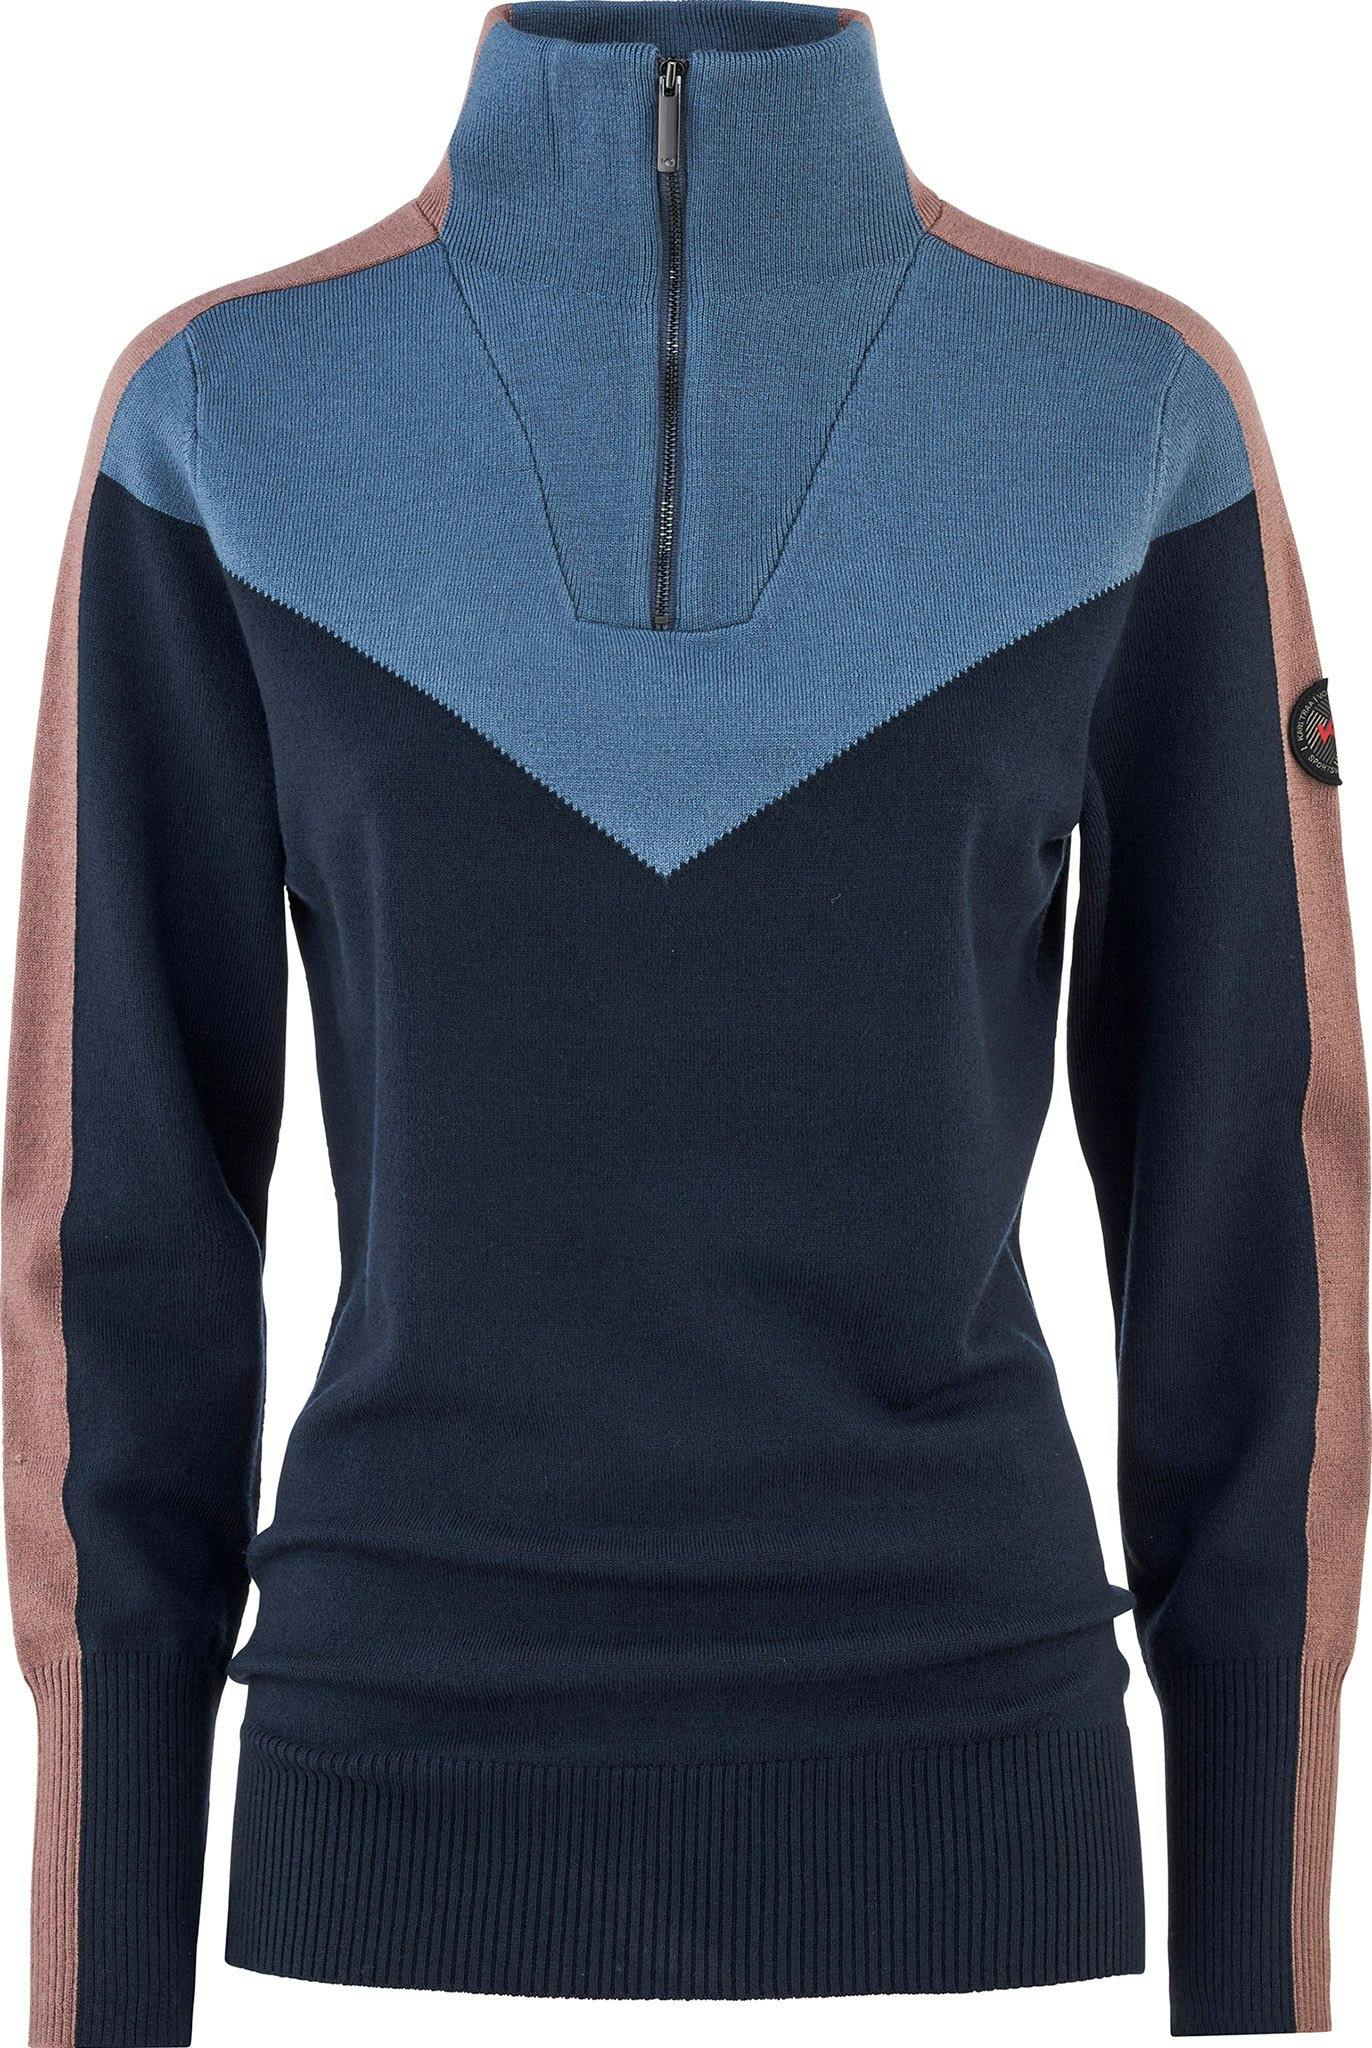 Product image for Voss Knit Half Zip Sweater - Women's